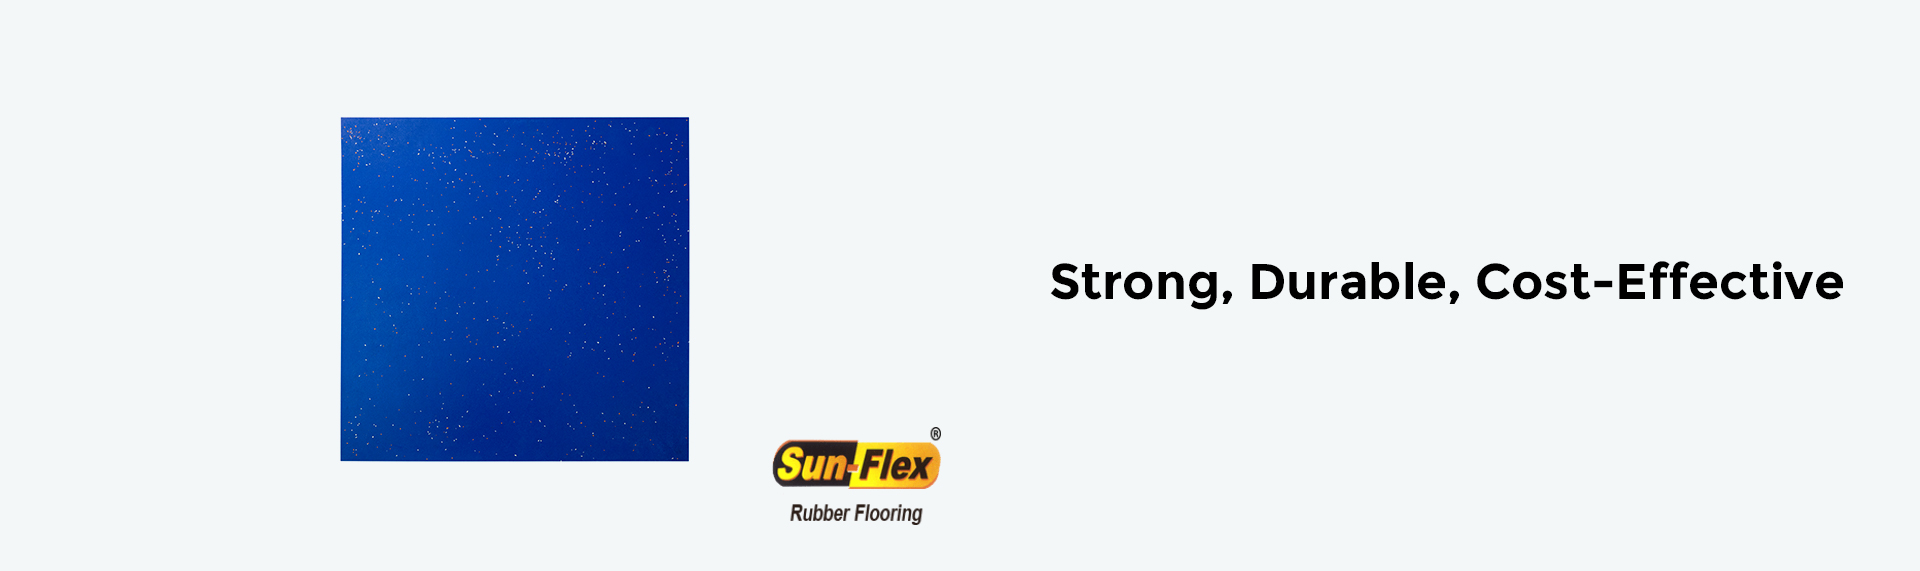 Strong,-Durable,-Cost-Effective